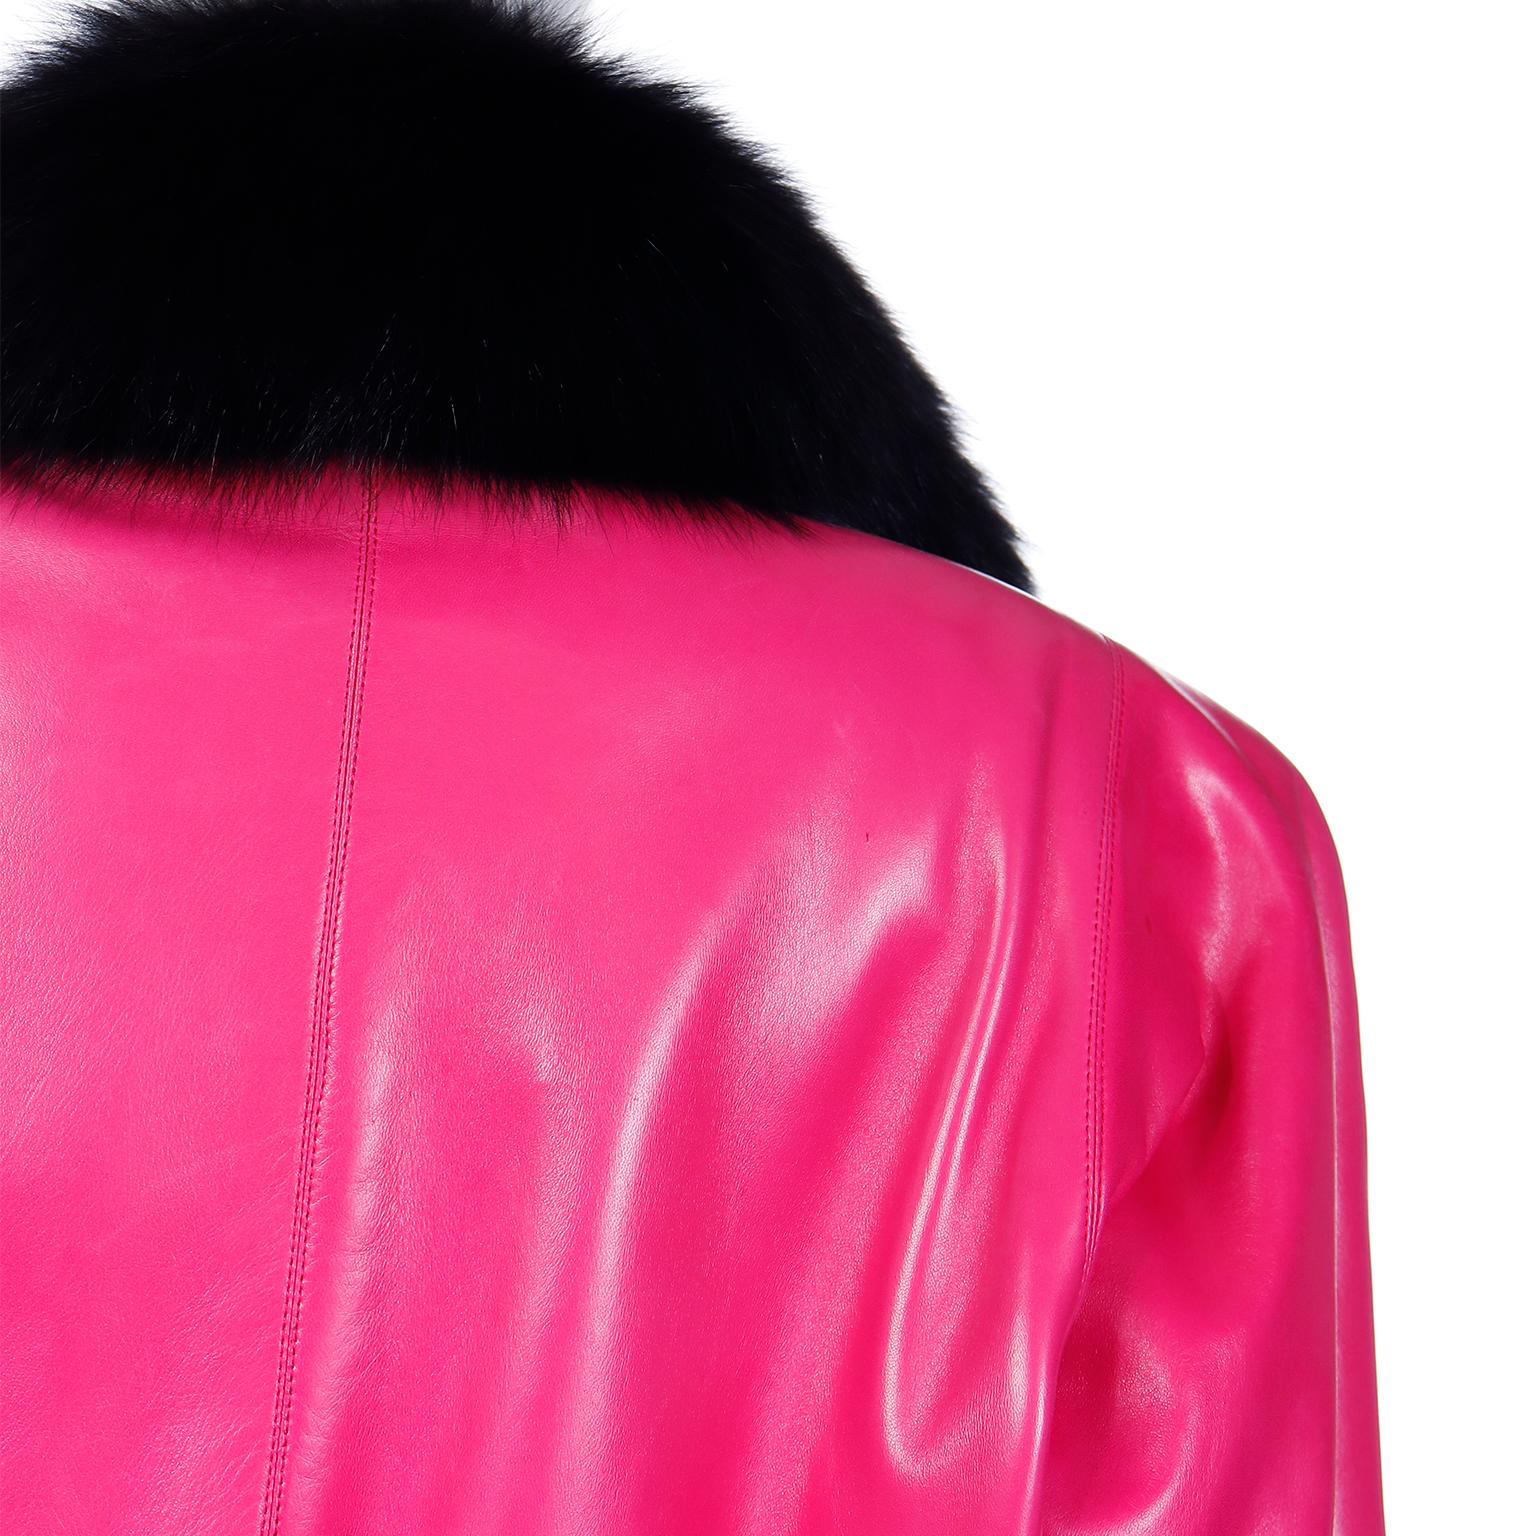 1987 Yves Saint Laurent Runway Haute Couture Pink Leather Jacket w Black Fur For Sale 2